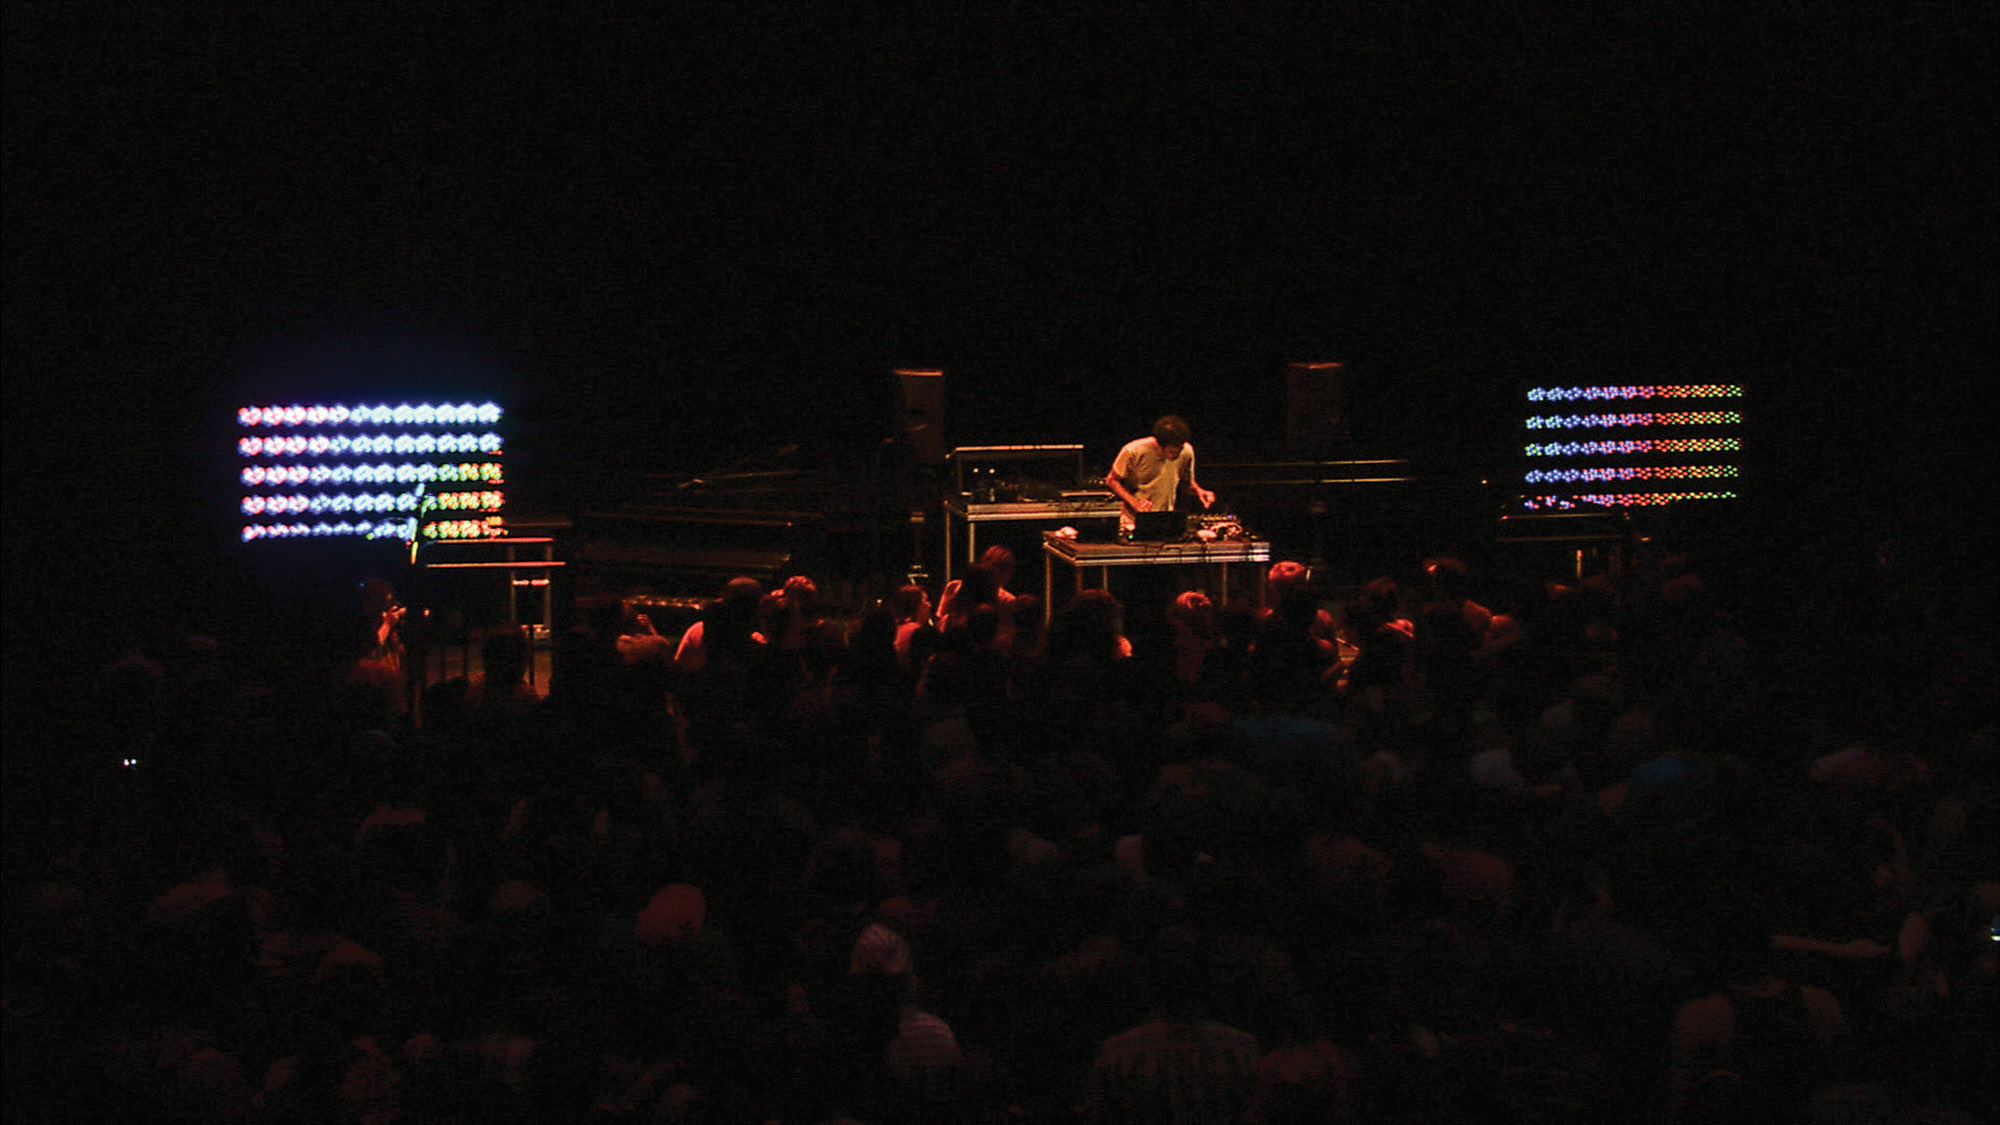 A man DJing to a packed crowd in a dark room lit only by dim red light and the two screens on either side of the stage showing lines of rainbow shapes. 